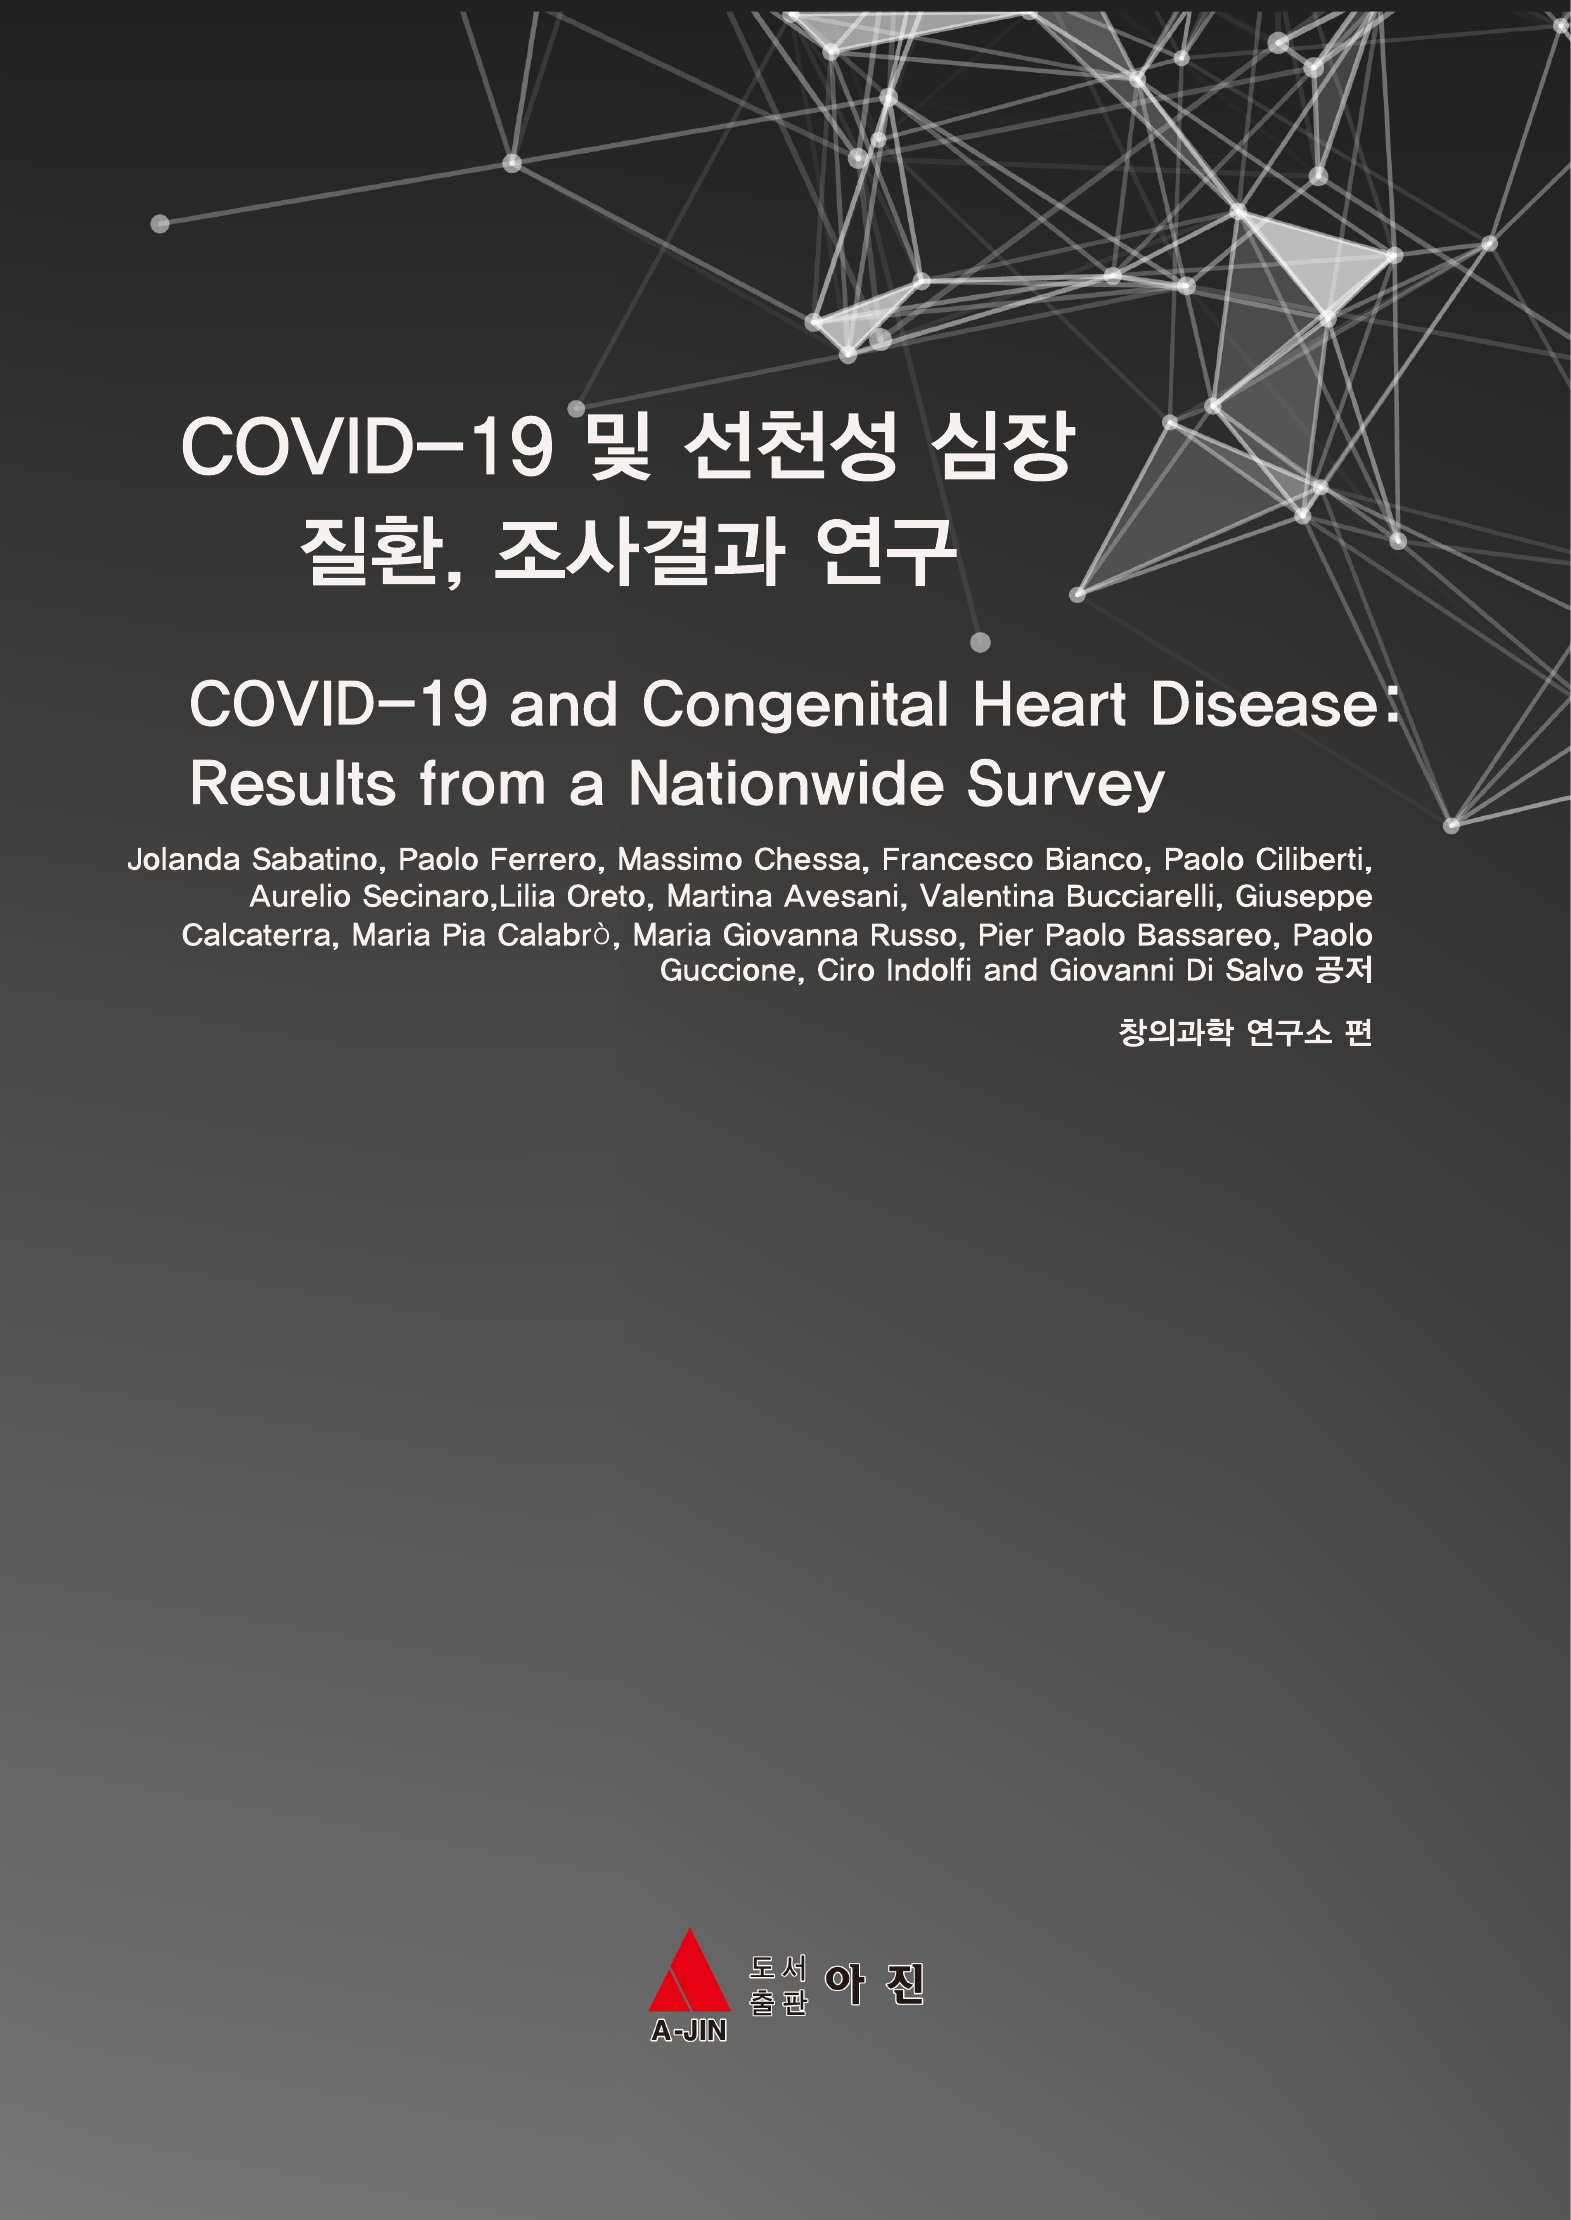 COVID-19 및 선천성 심장 질환, 조사결과 연구(COVID-19 and Congenital Heart Disease: Results from a Nationwide Survey)